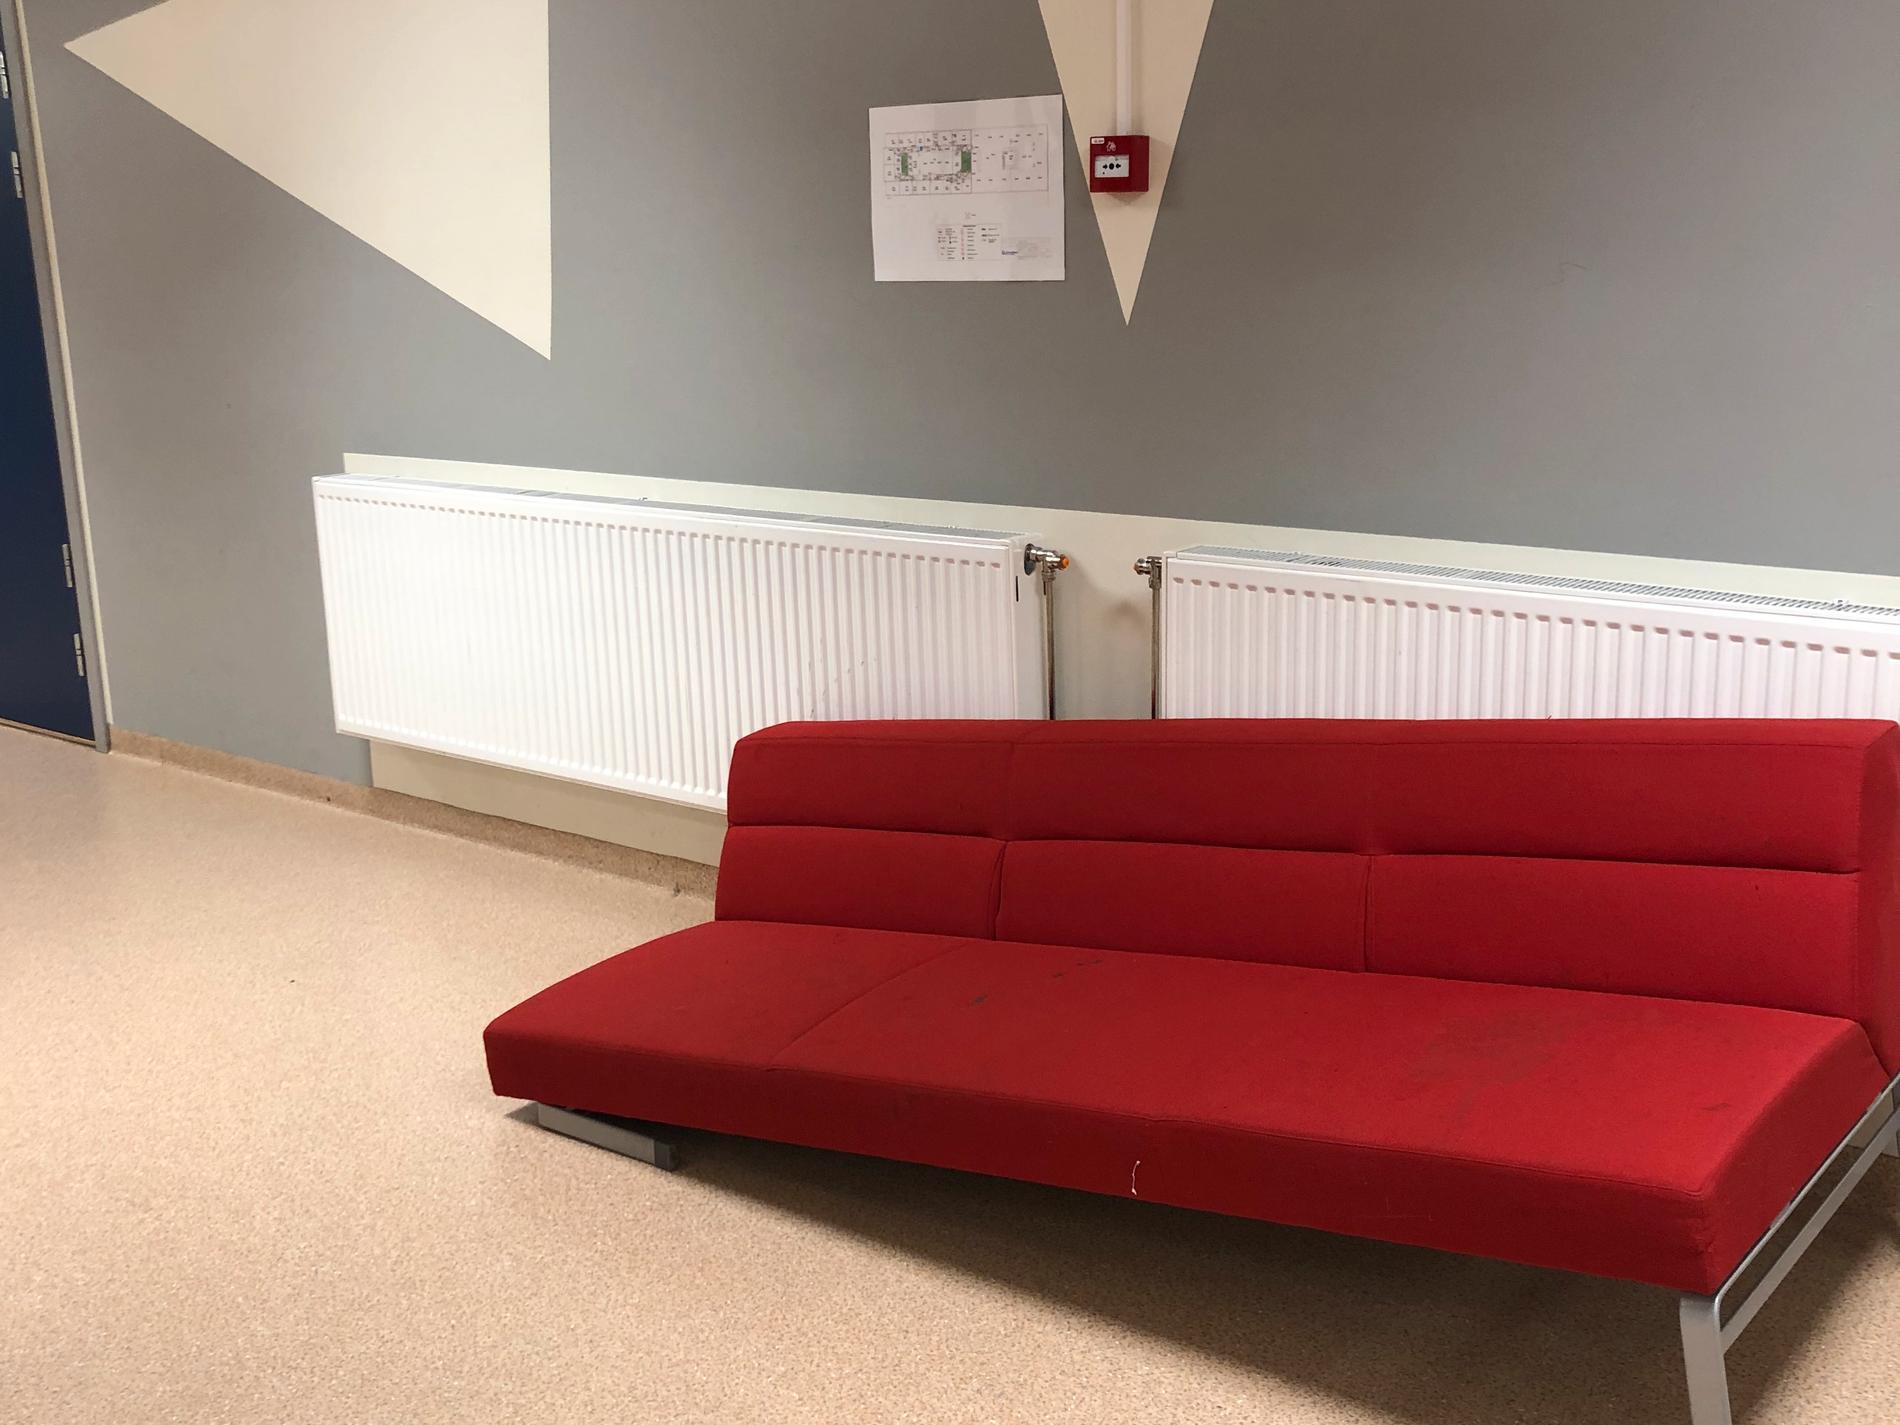 Group break: An empty red sofa is constantly left in the hall at Holtan High School in Horten.